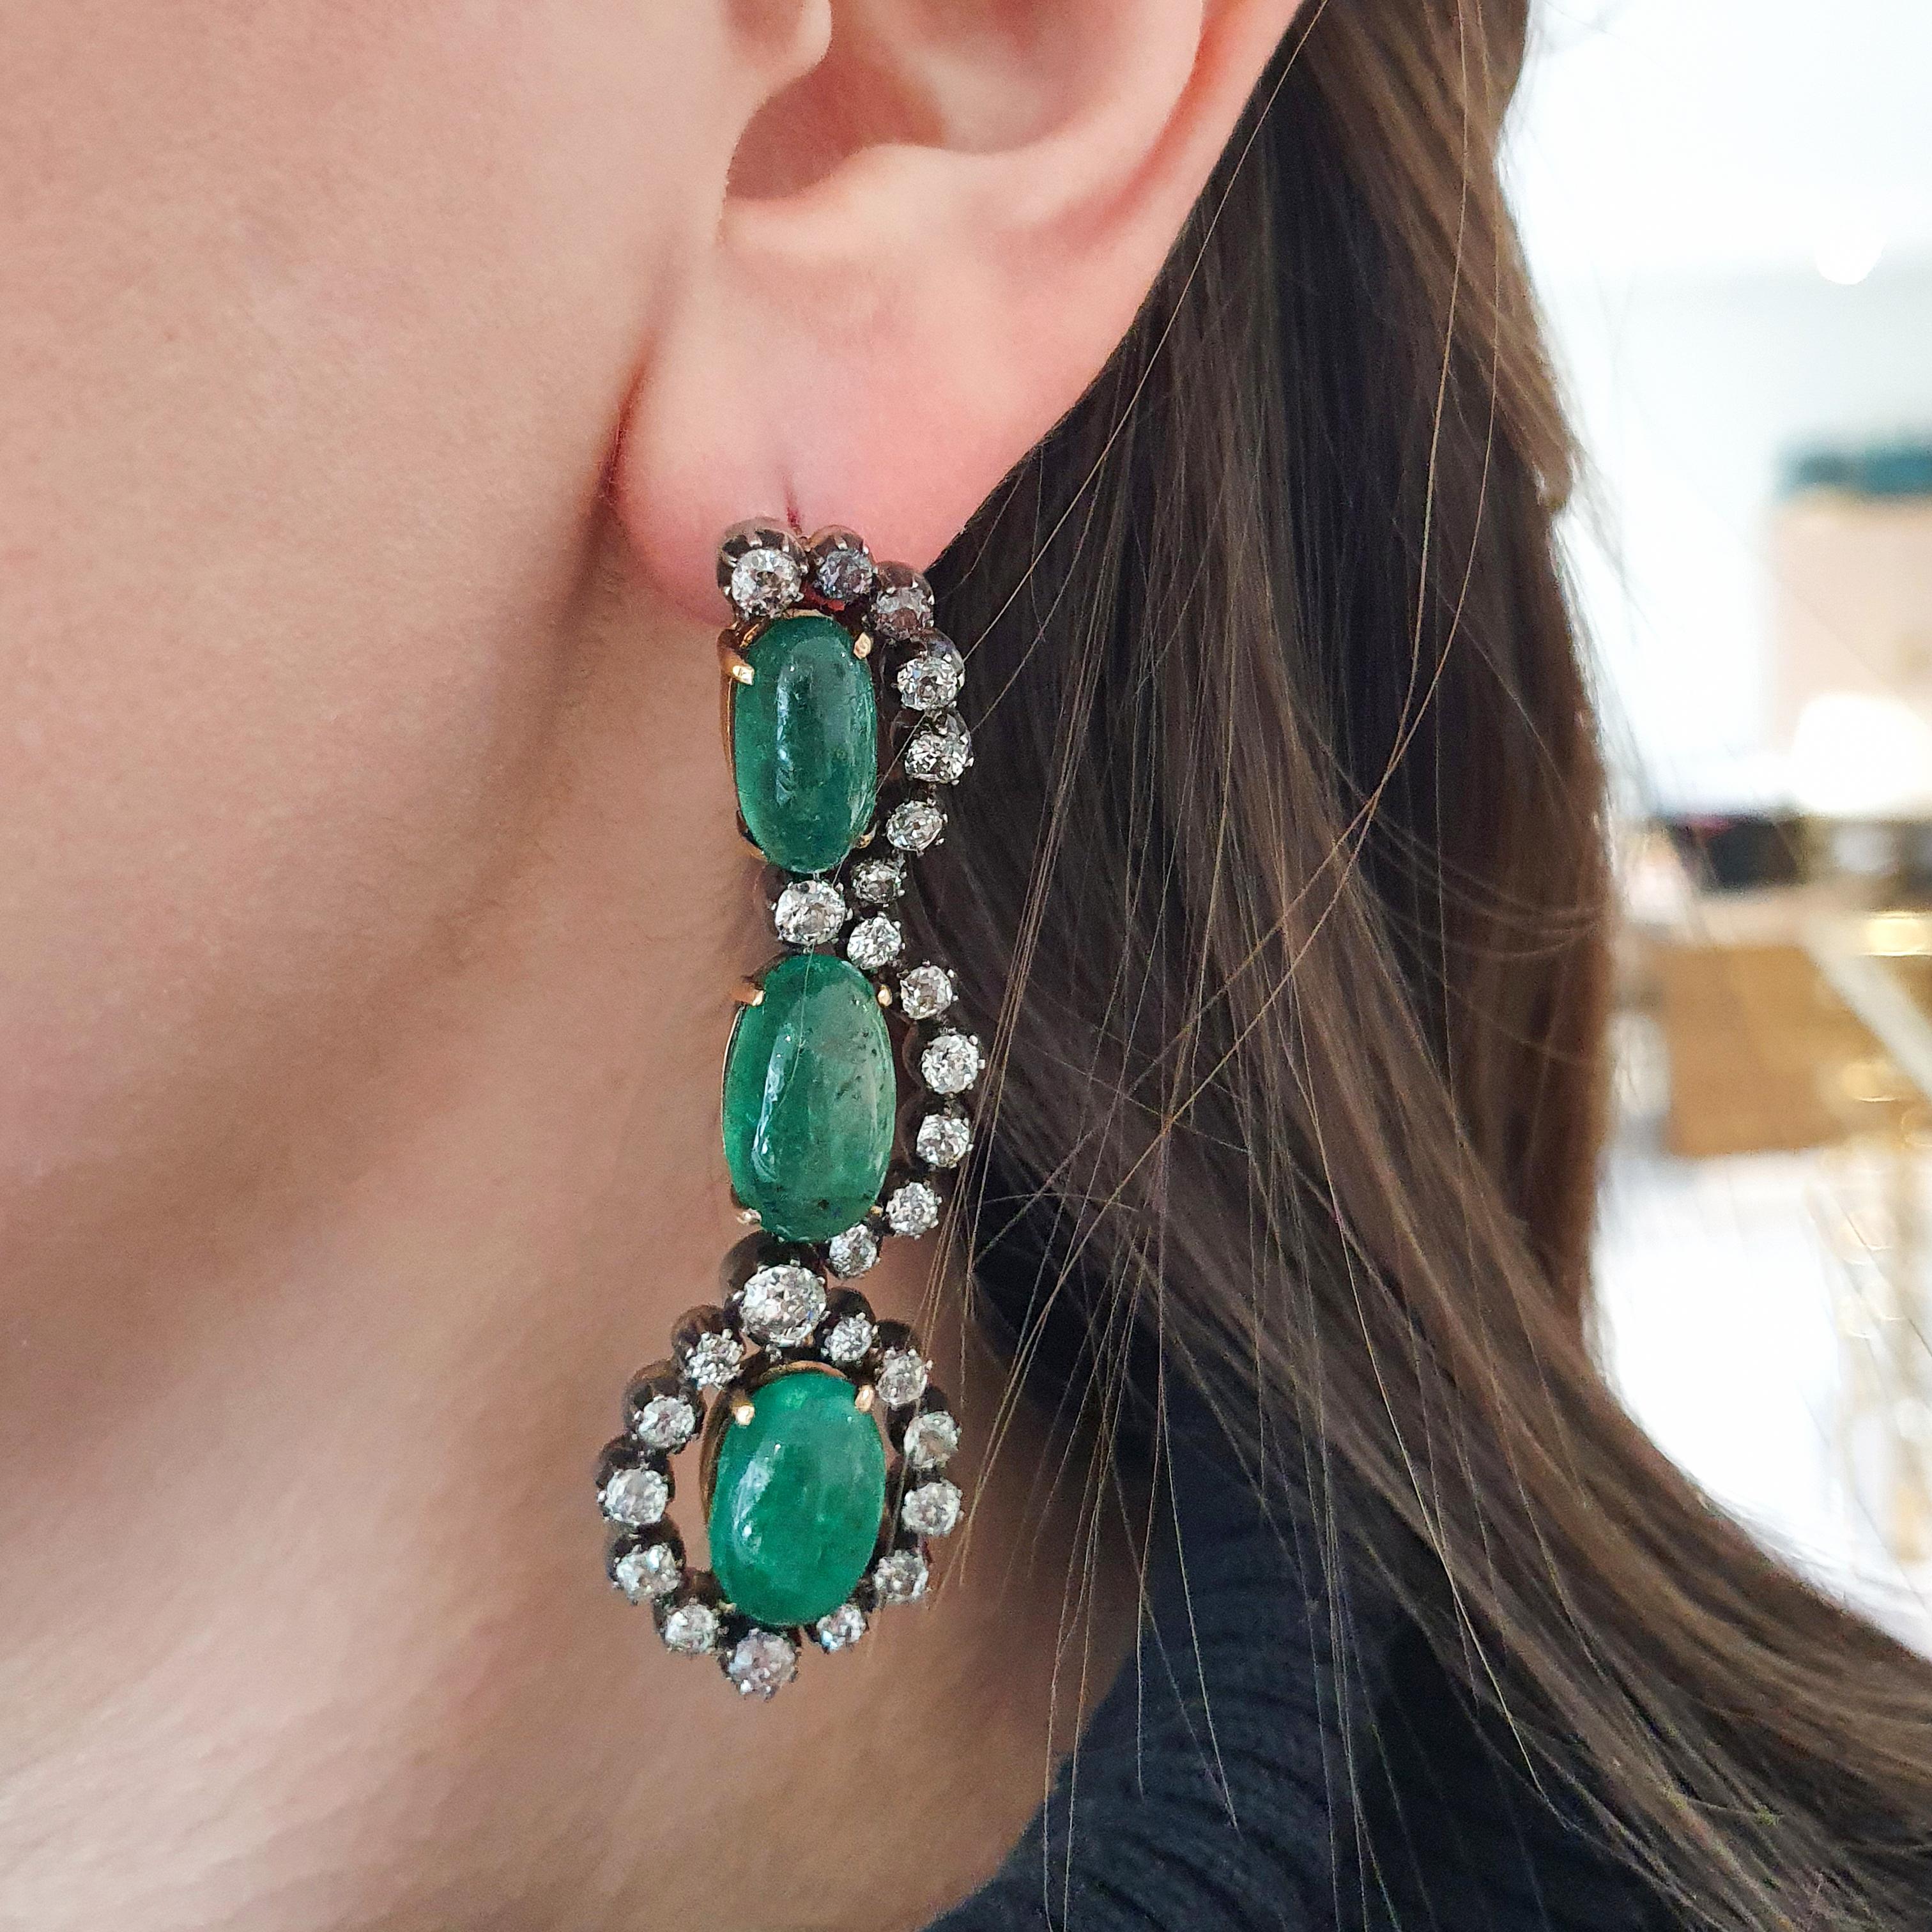 Presenting a truly exceptional piece from the former Austrian Royal Family collection, we have a breathtaking Cabochon Emerald surrounded by Old-mine cut diamonds, set on a backdrop of silver and gold. This magnificent jewel, dating back to the mid